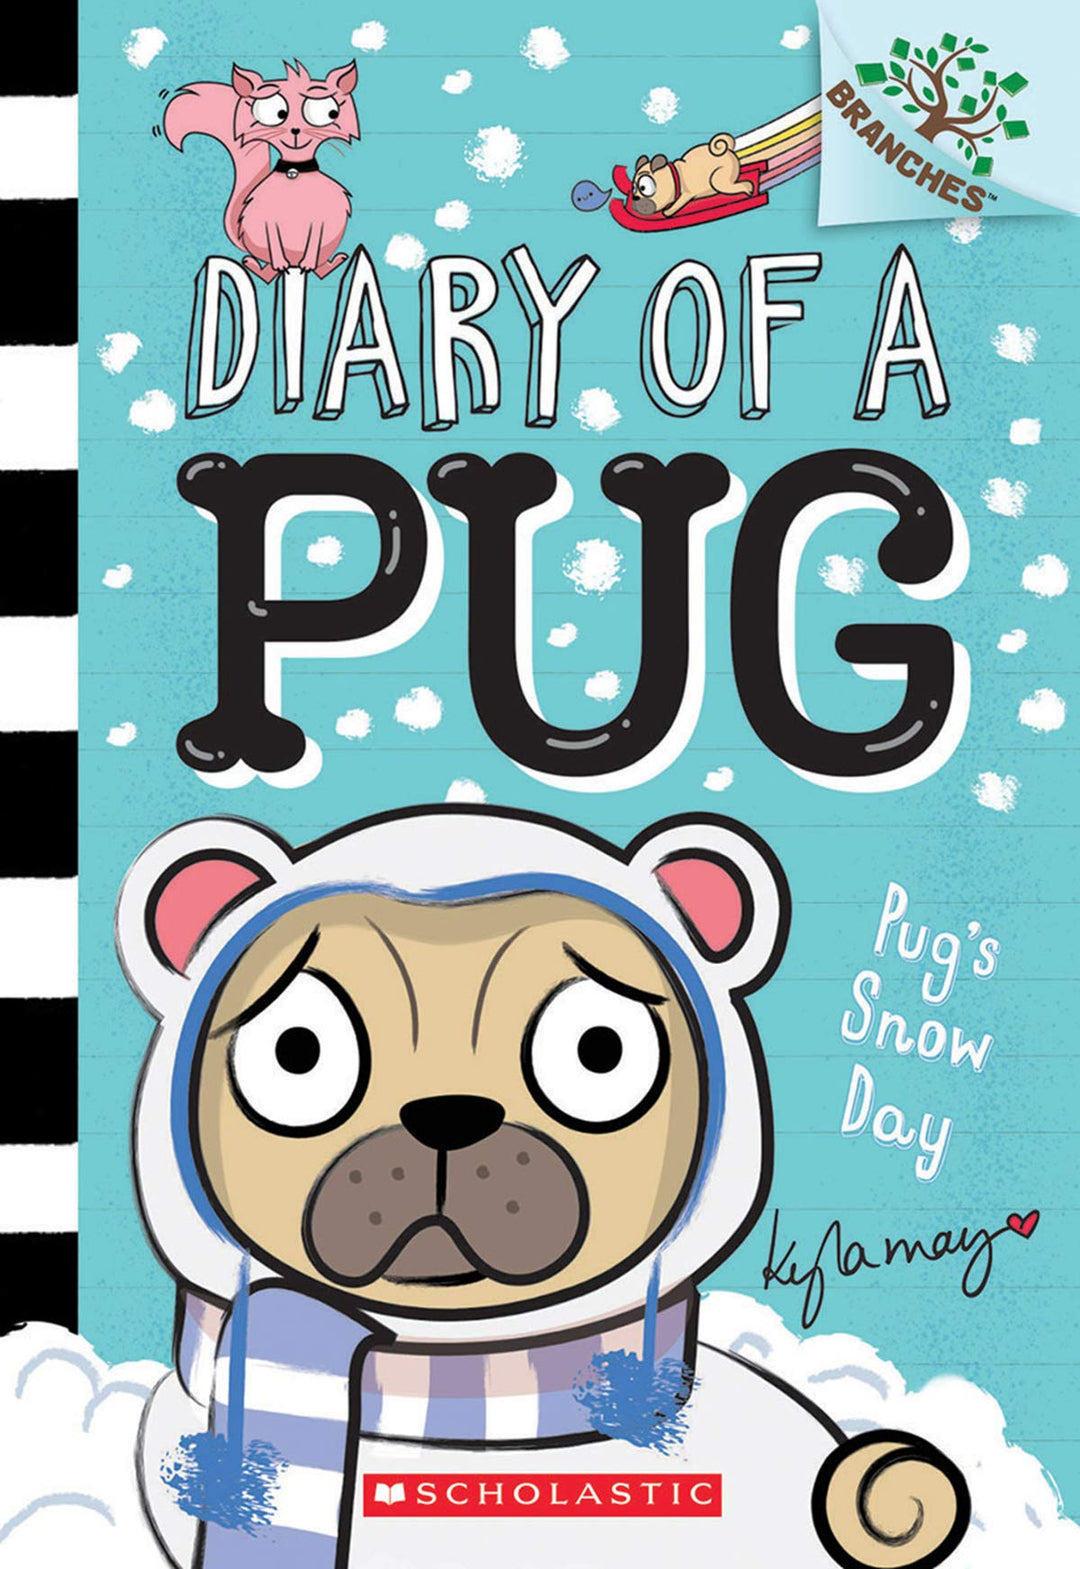 Branches - Diary of a Pug #2: Pug's Snow Day